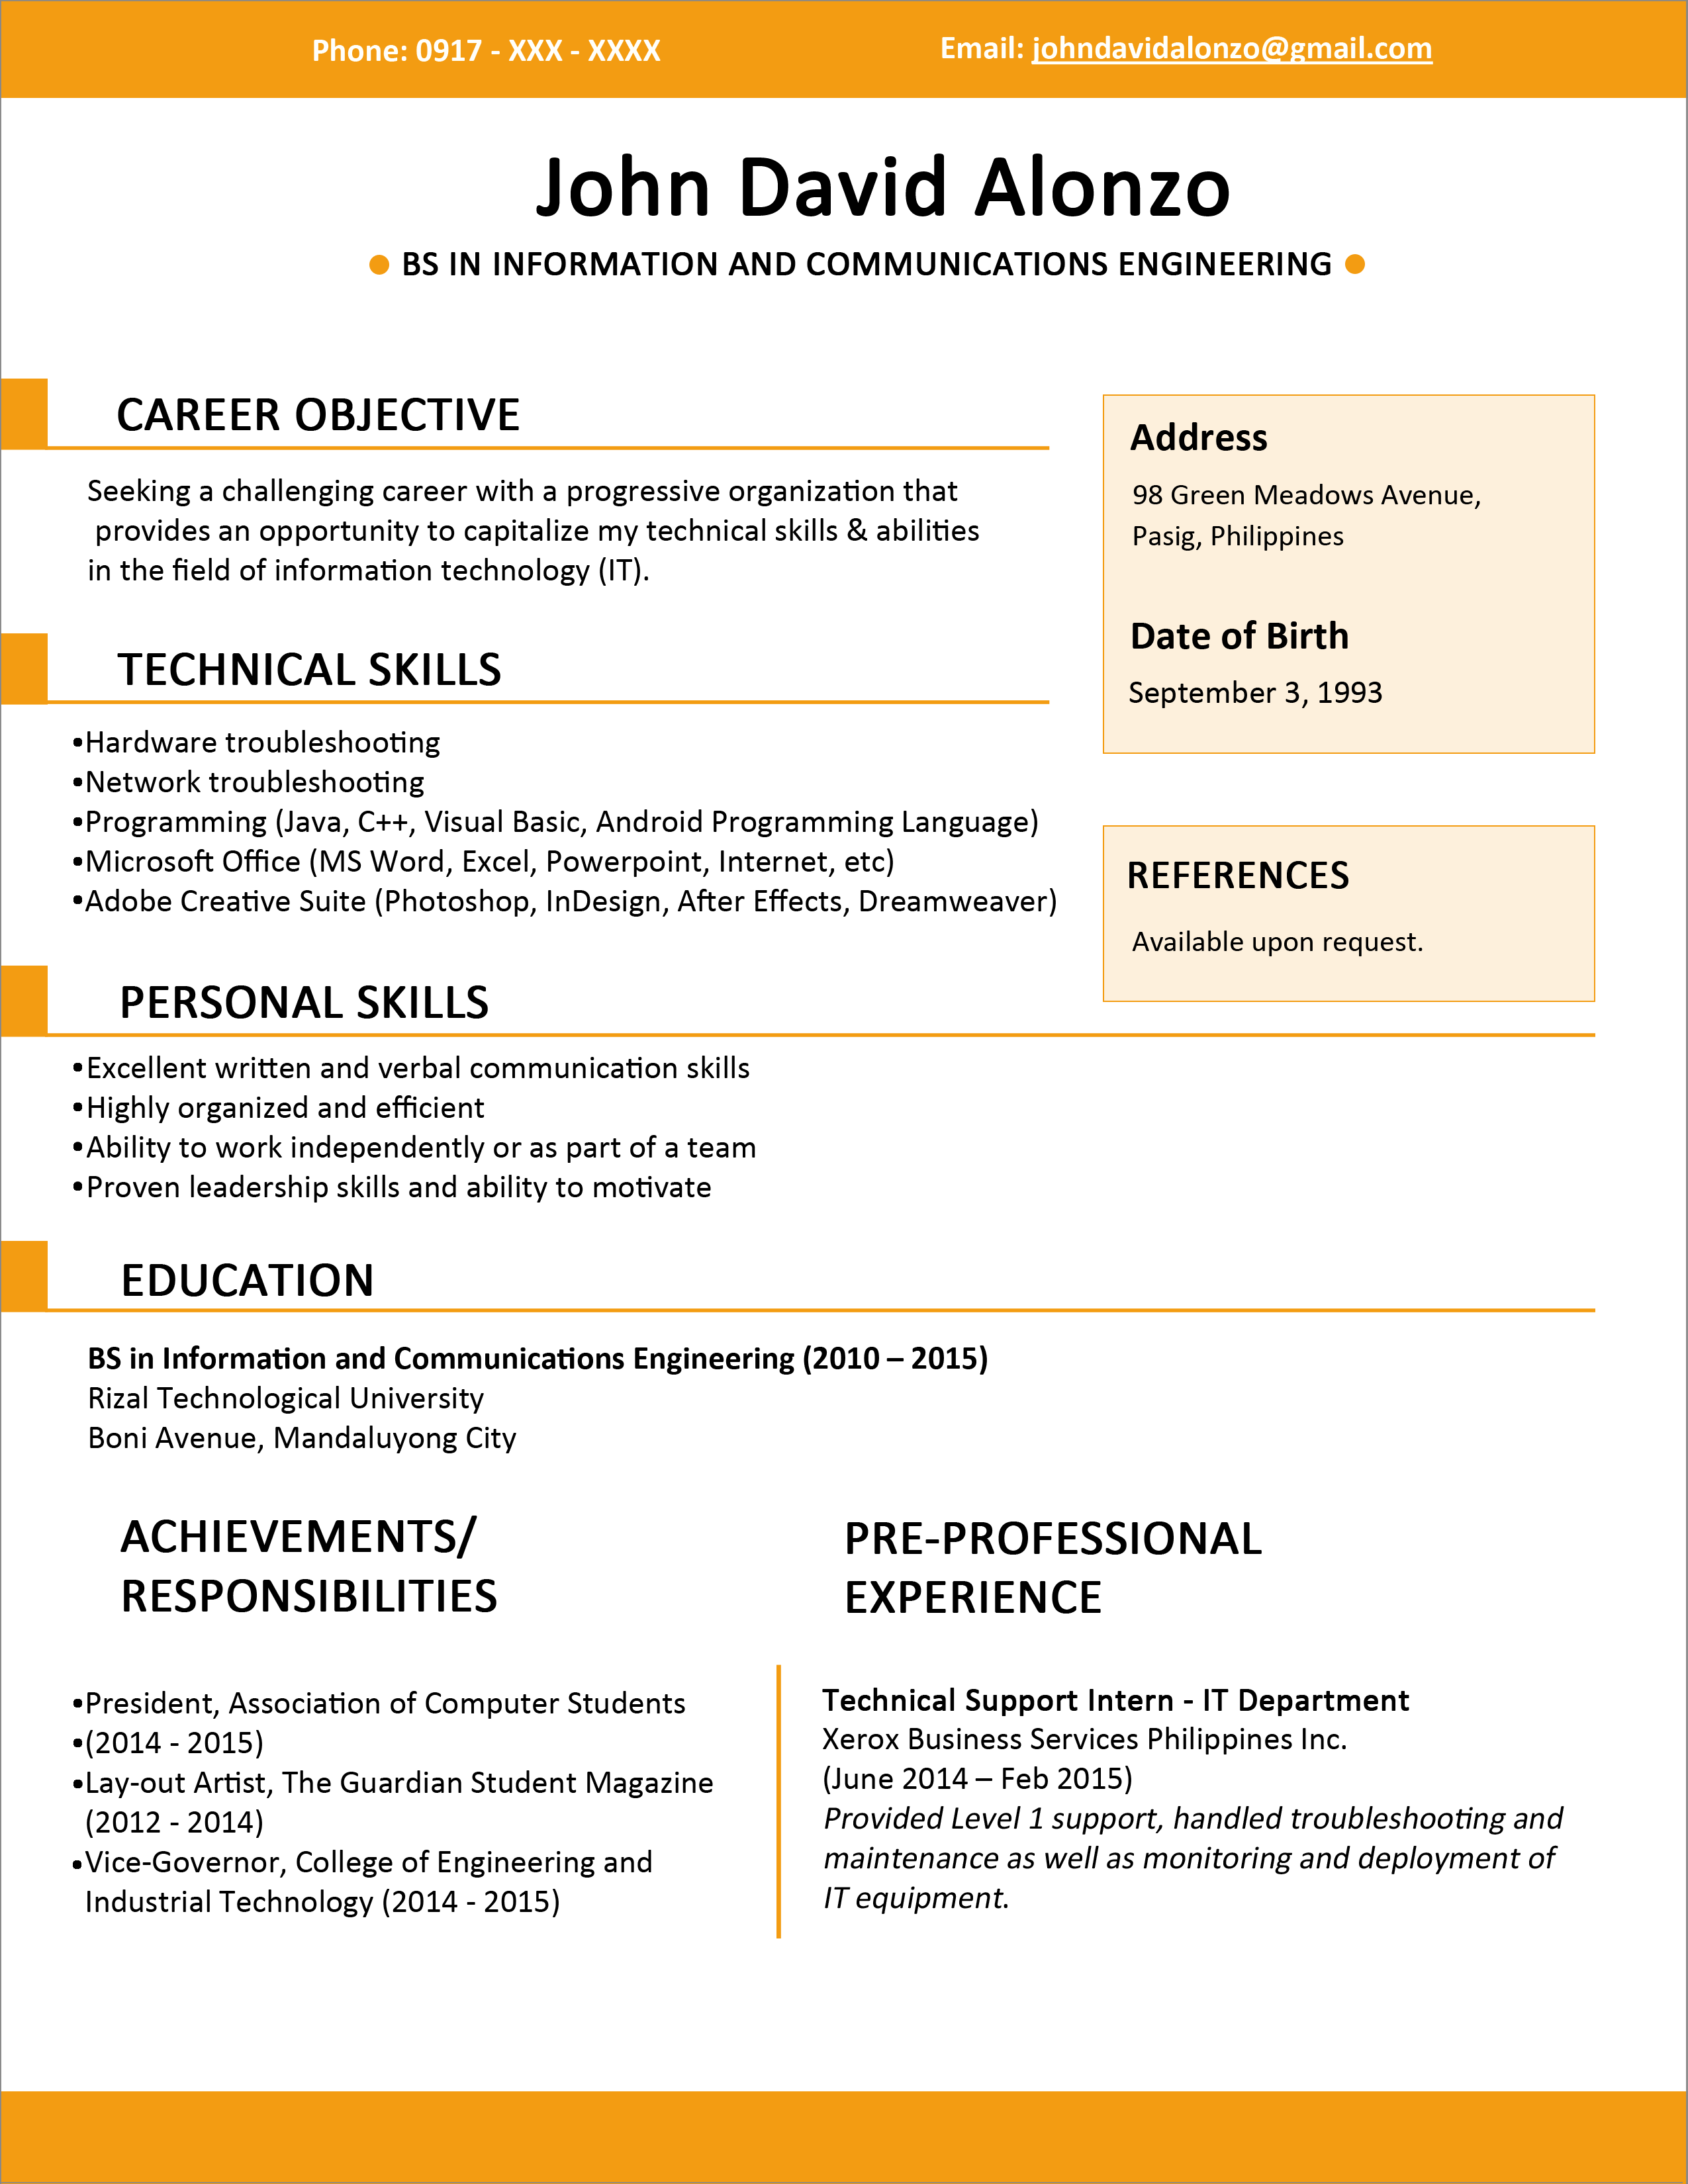 Example Of A Resume Sample Resume Format For Fresh Graduates Single Page 41 example of a resume|wikiresume.com